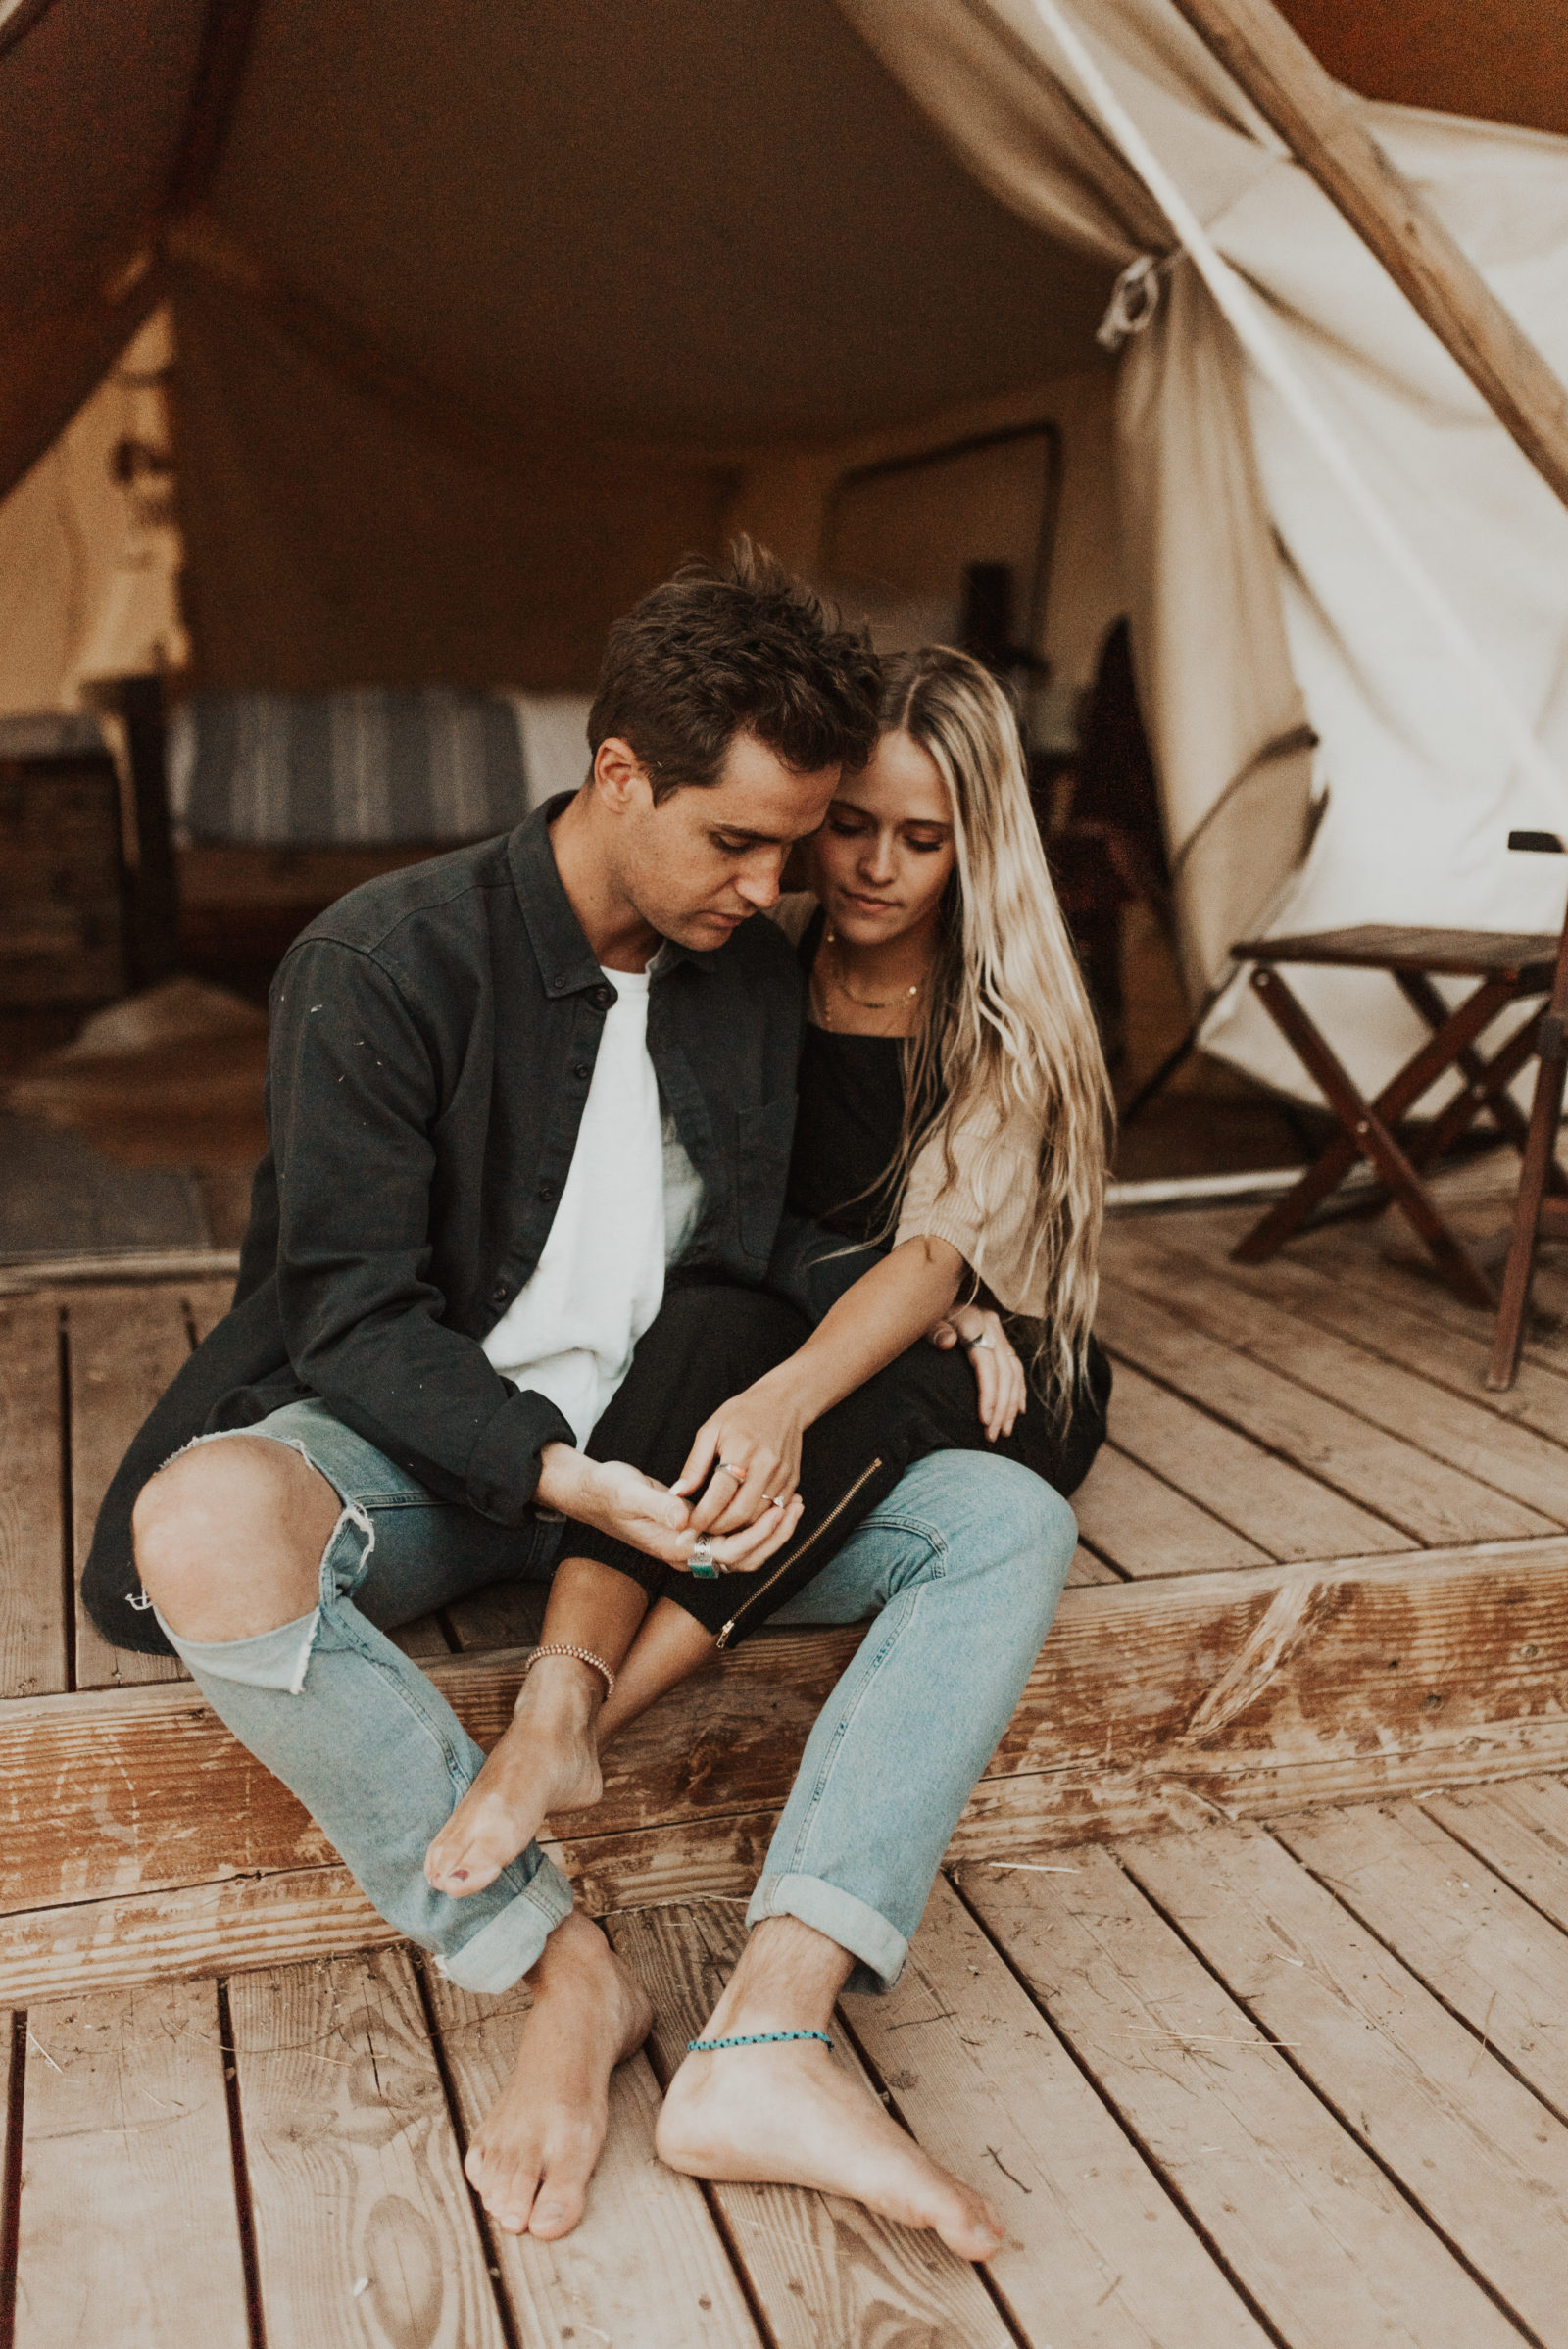 http://www.sydneemarie.com/wp-content/uploads/2019/06/Sydnee-Marie-Photography-Zion-National-Park-engagement-session_-3-1600x2397.jpg